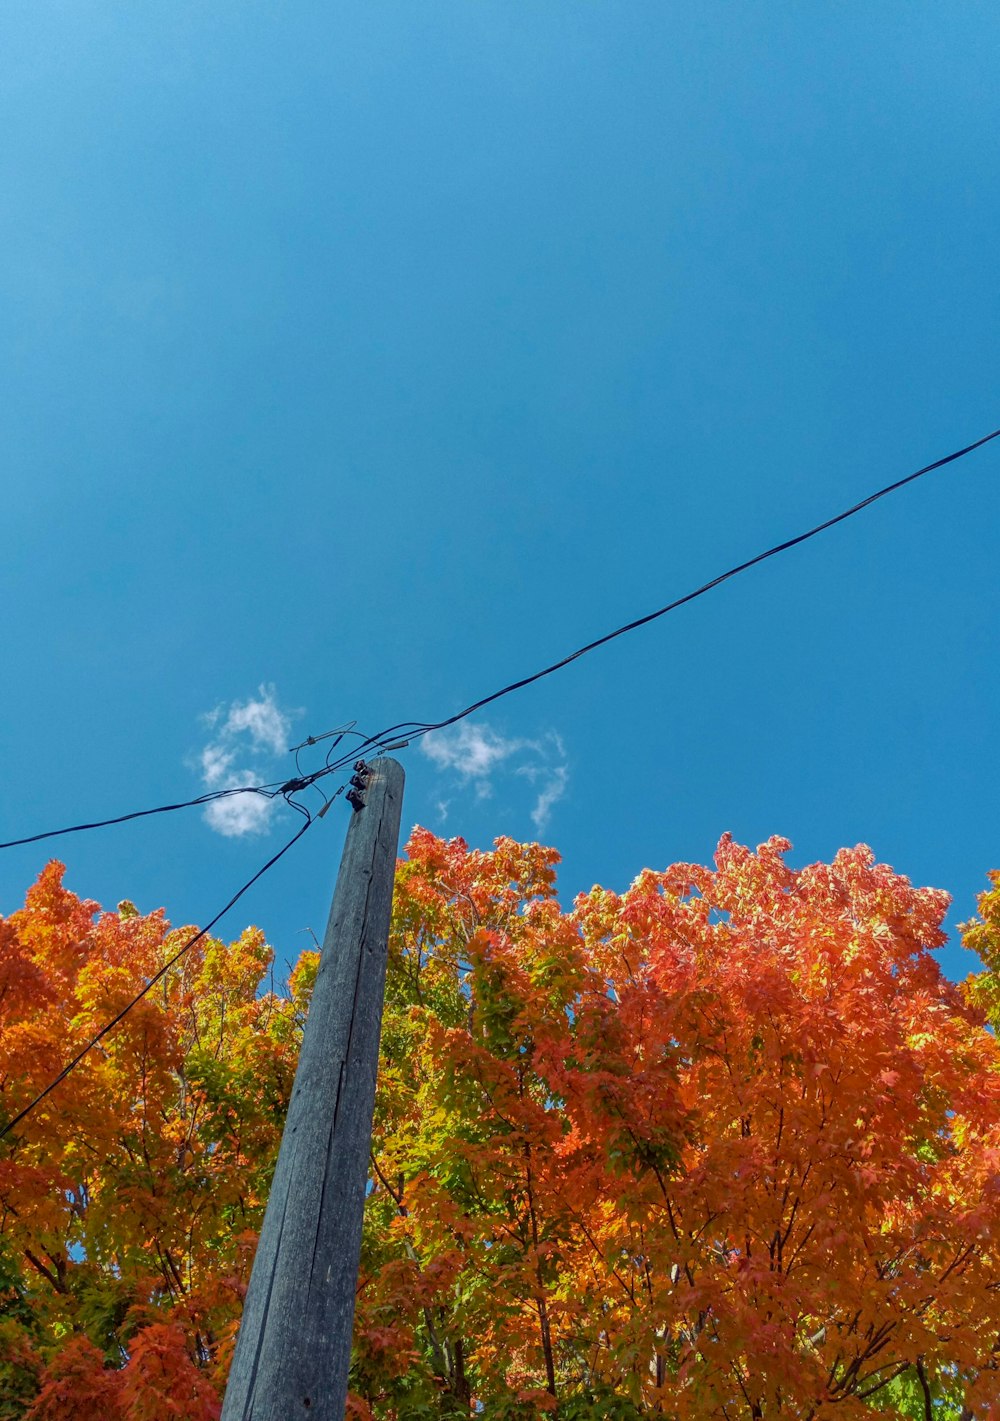 a power line pole with trees around it